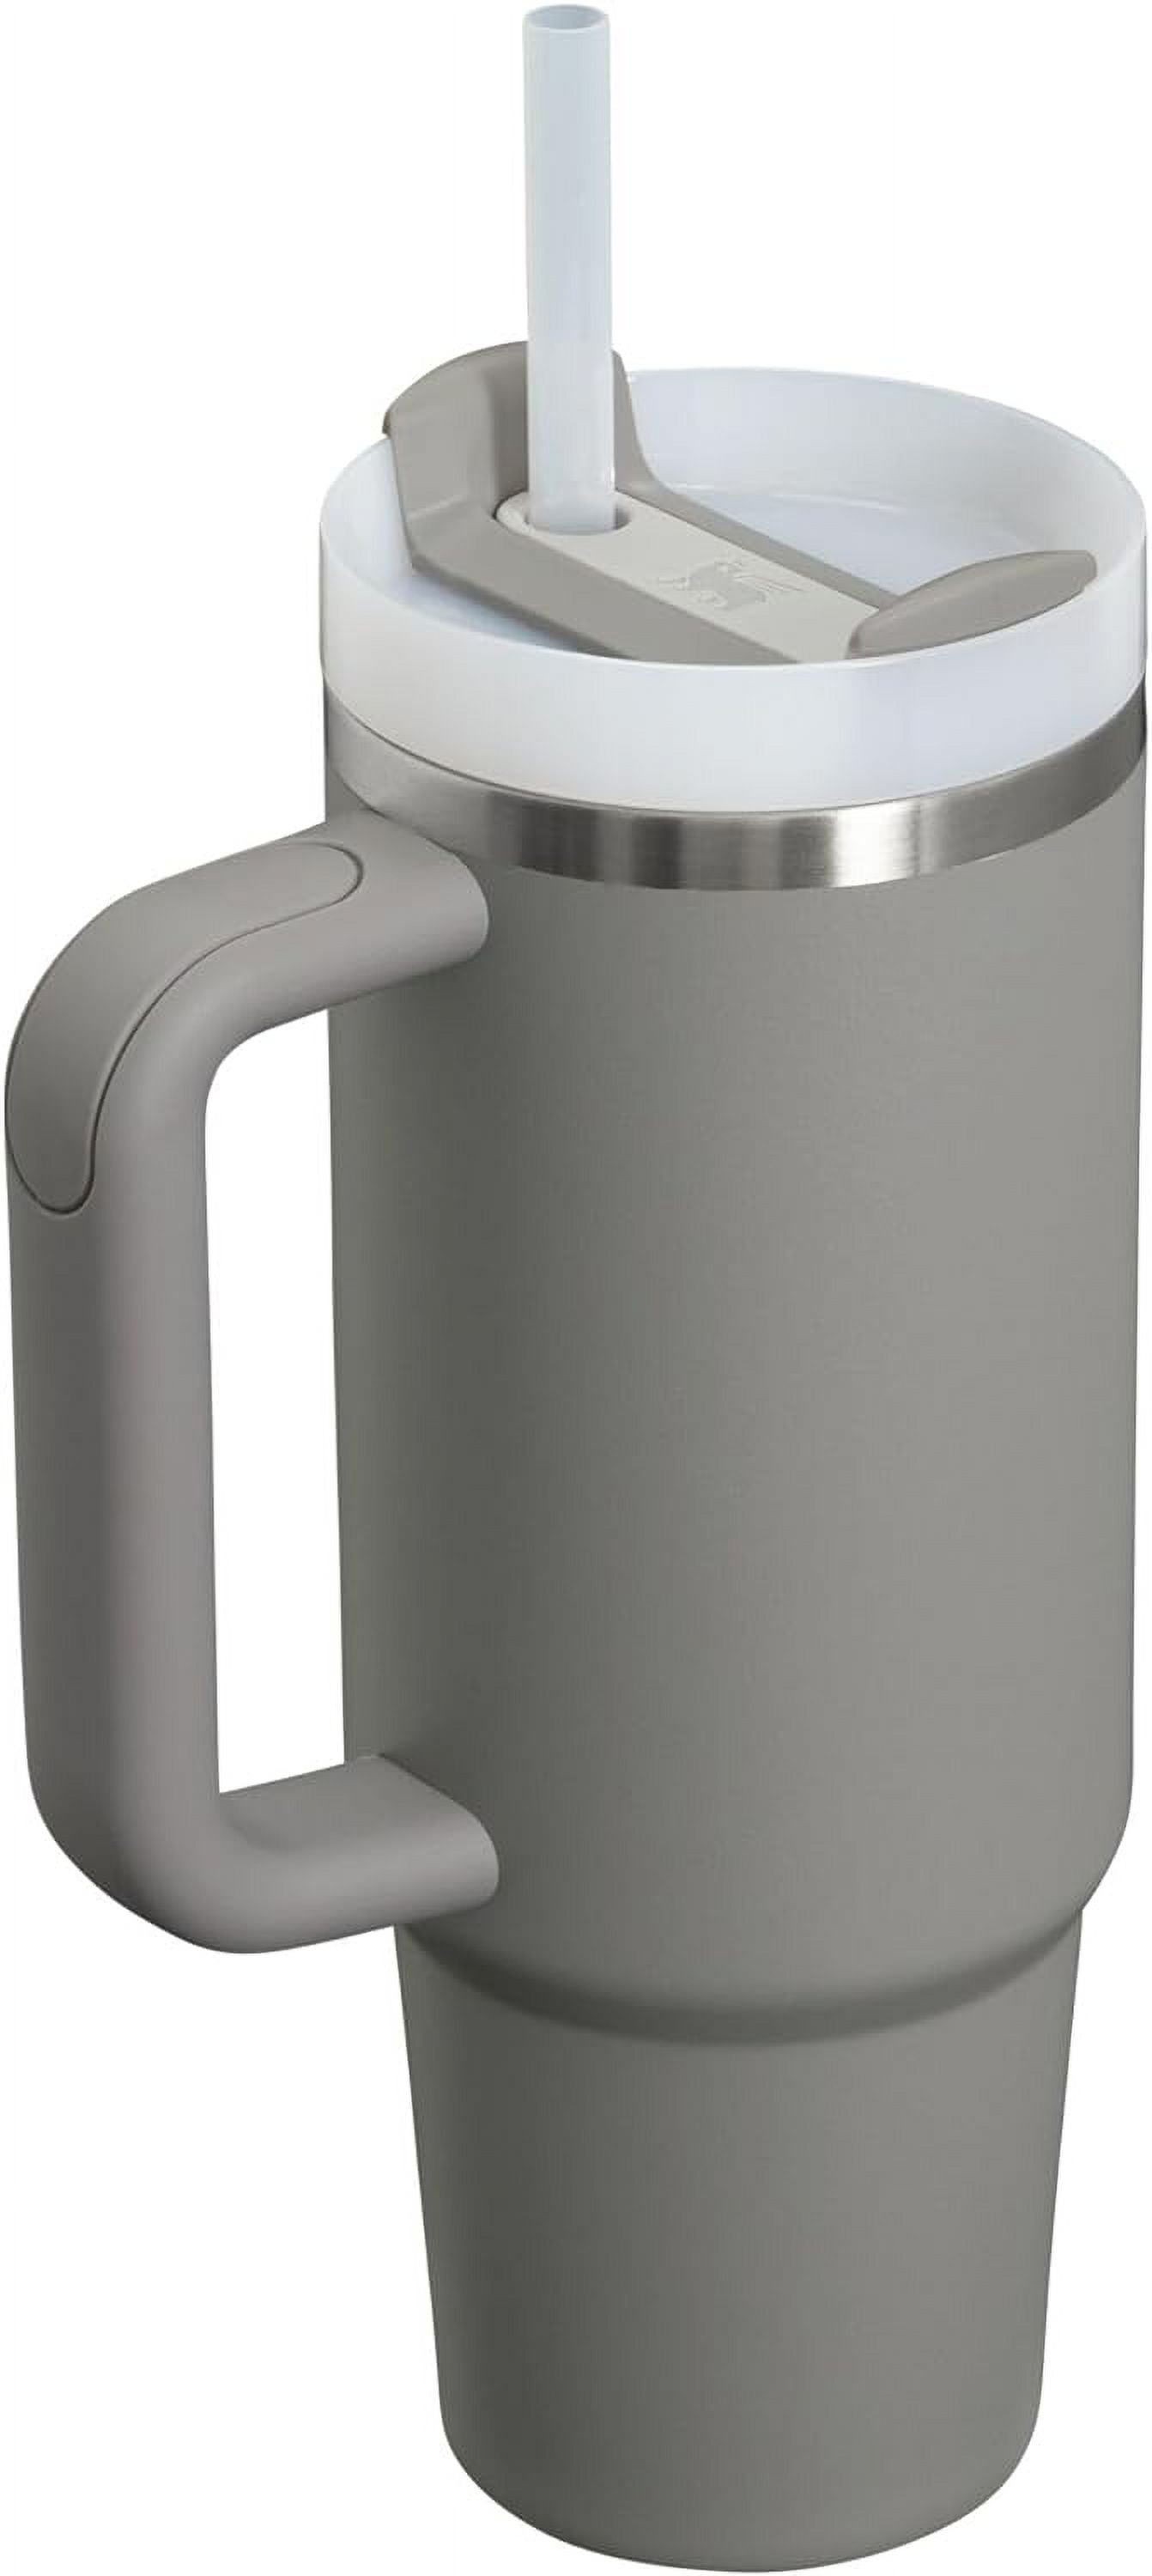 STANLEY THE QUENCHER H2.0 FLOWSTATE™ TUMBLER 40 OZ - baby enRoute